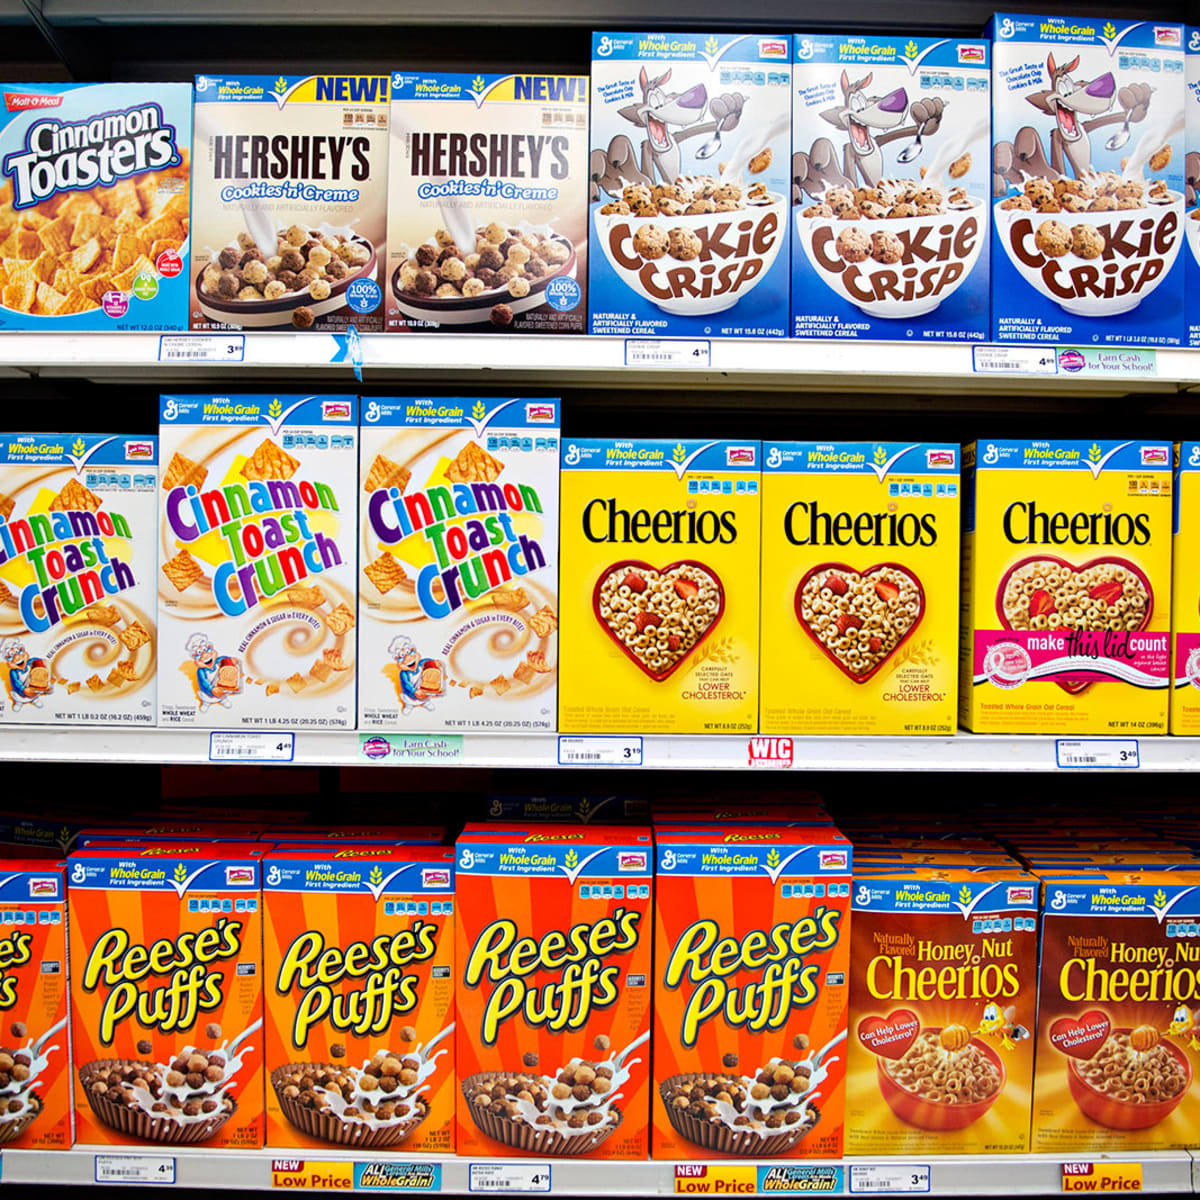 Shop for the best cereals from USA thanks to forwarder